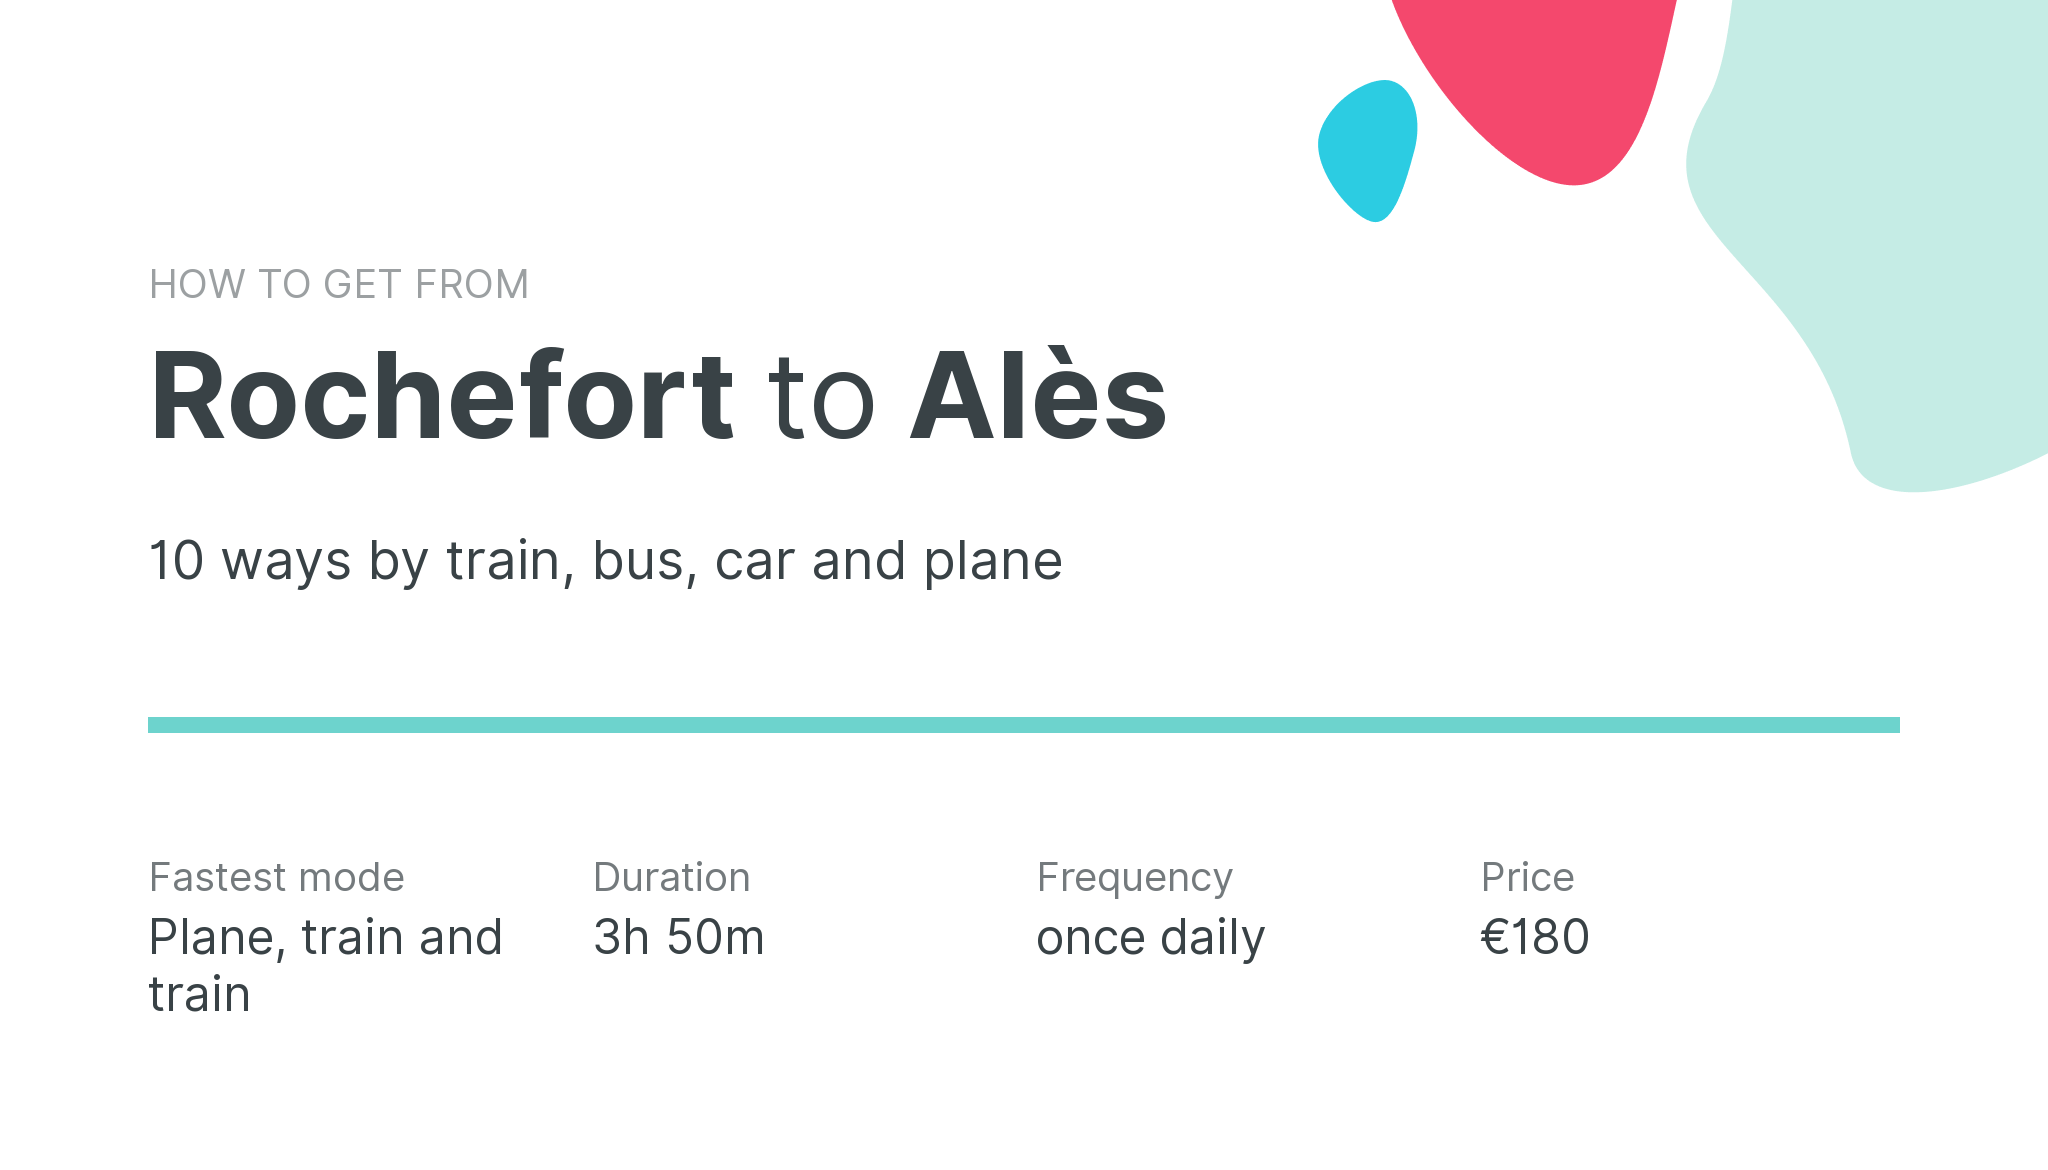 How do I get from Rochefort to Alès